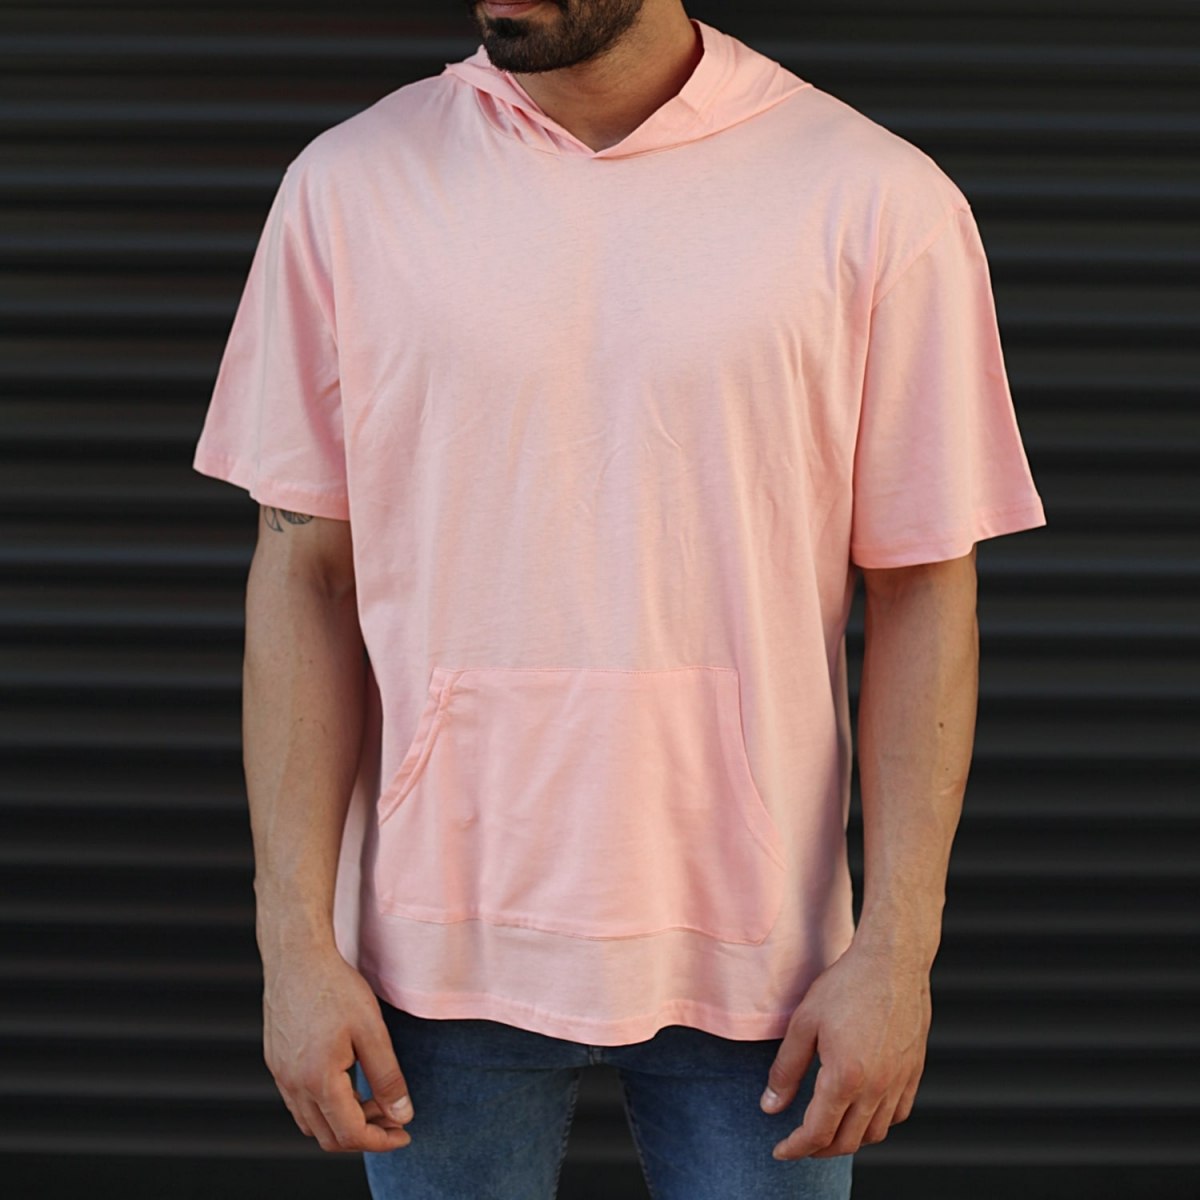 Men's Hooded Short Sleeve T-Shirt With Pockets Pink